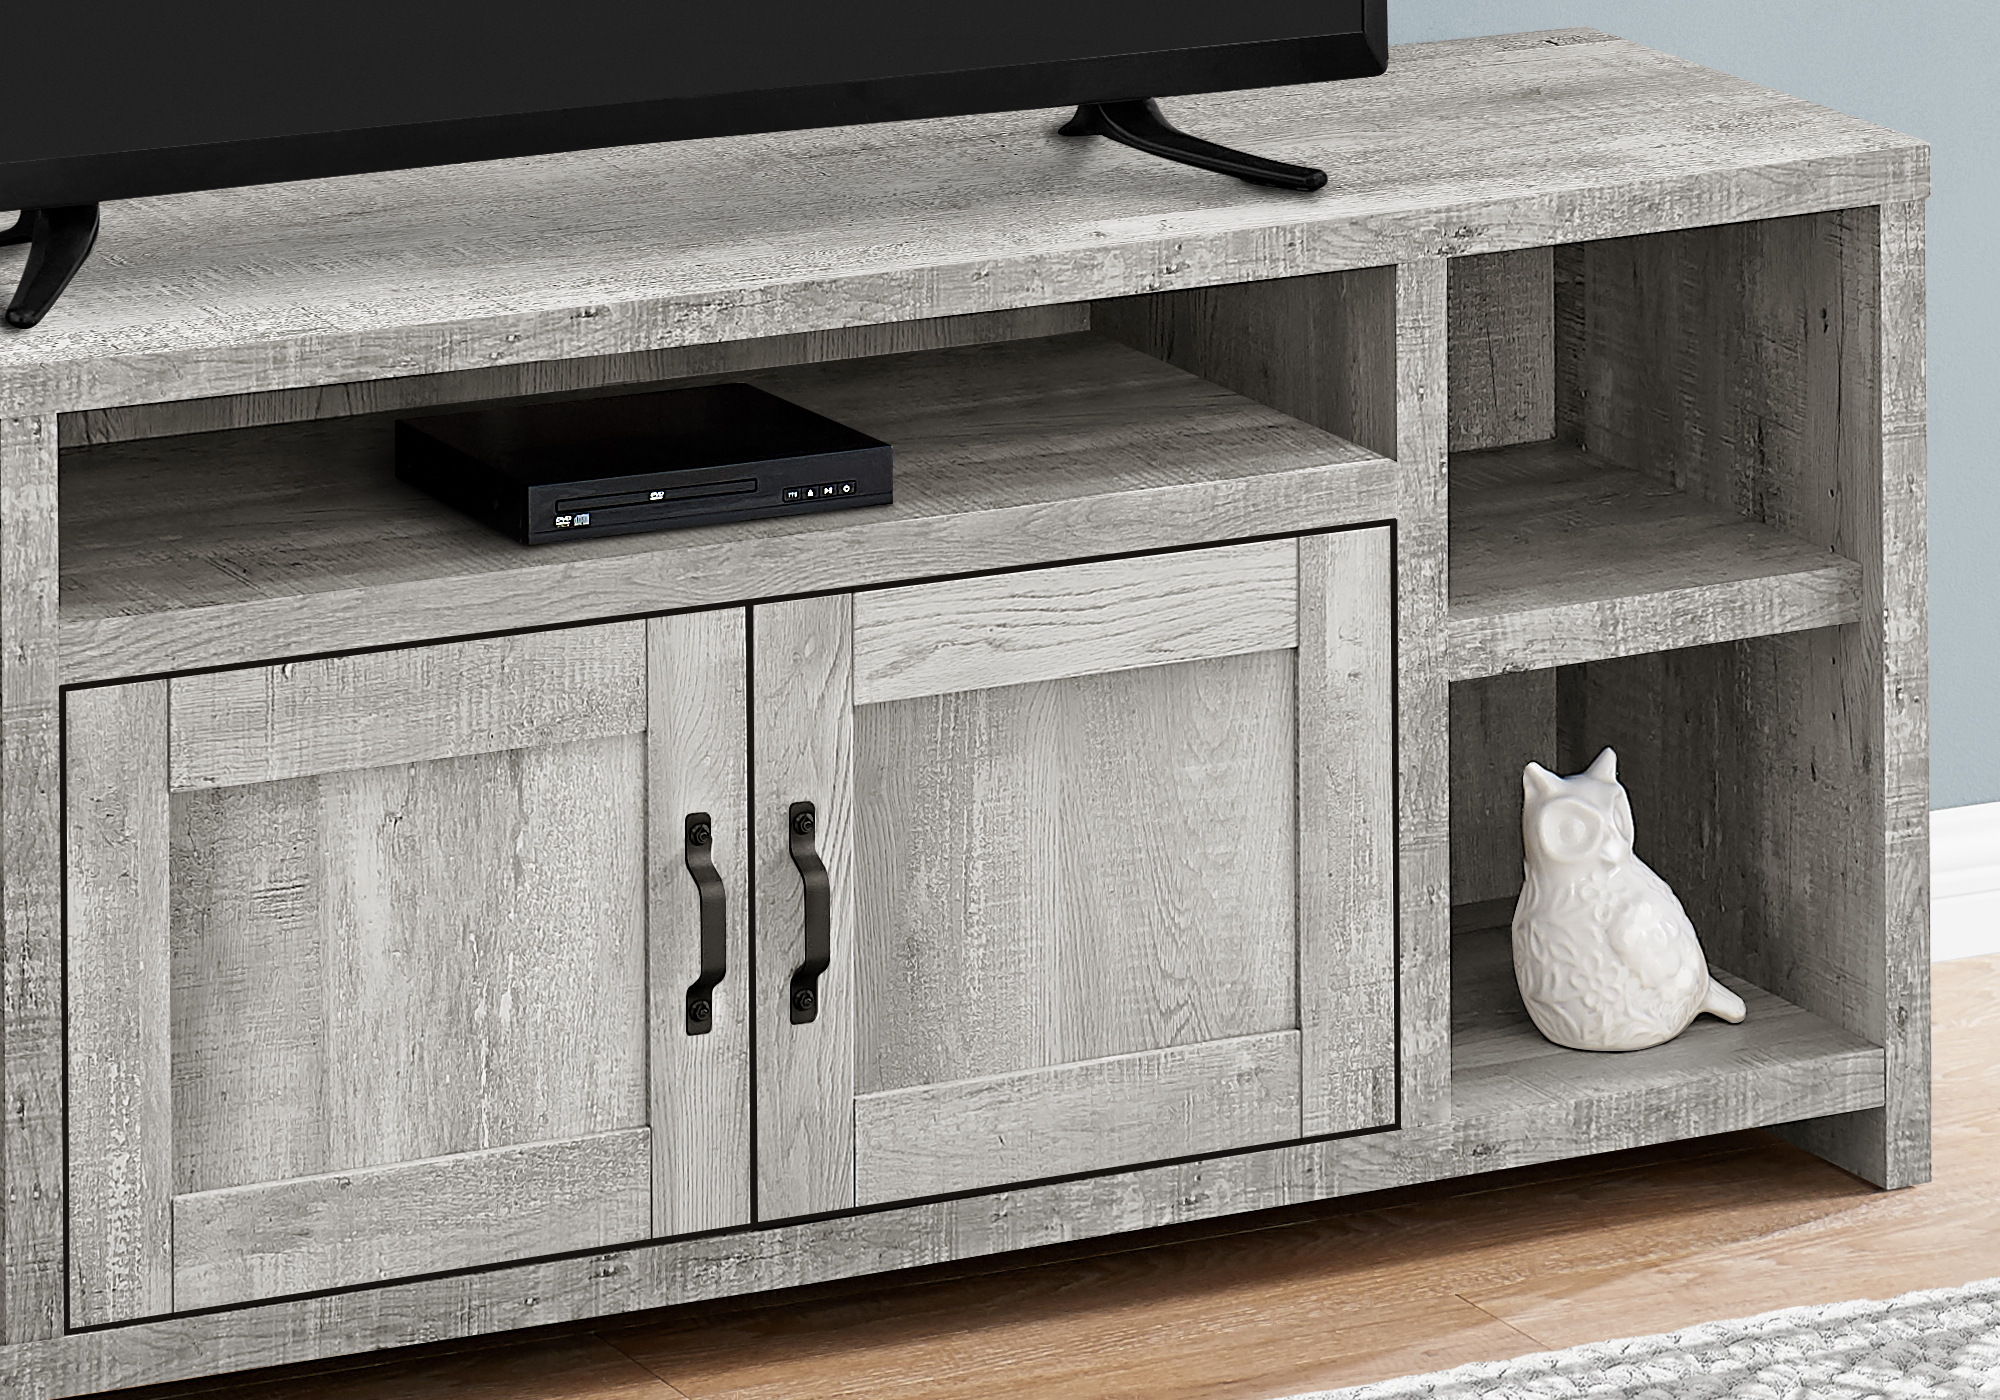 TV STAND - 60"L / GREY RECLAIMED WOOD-LOOK"